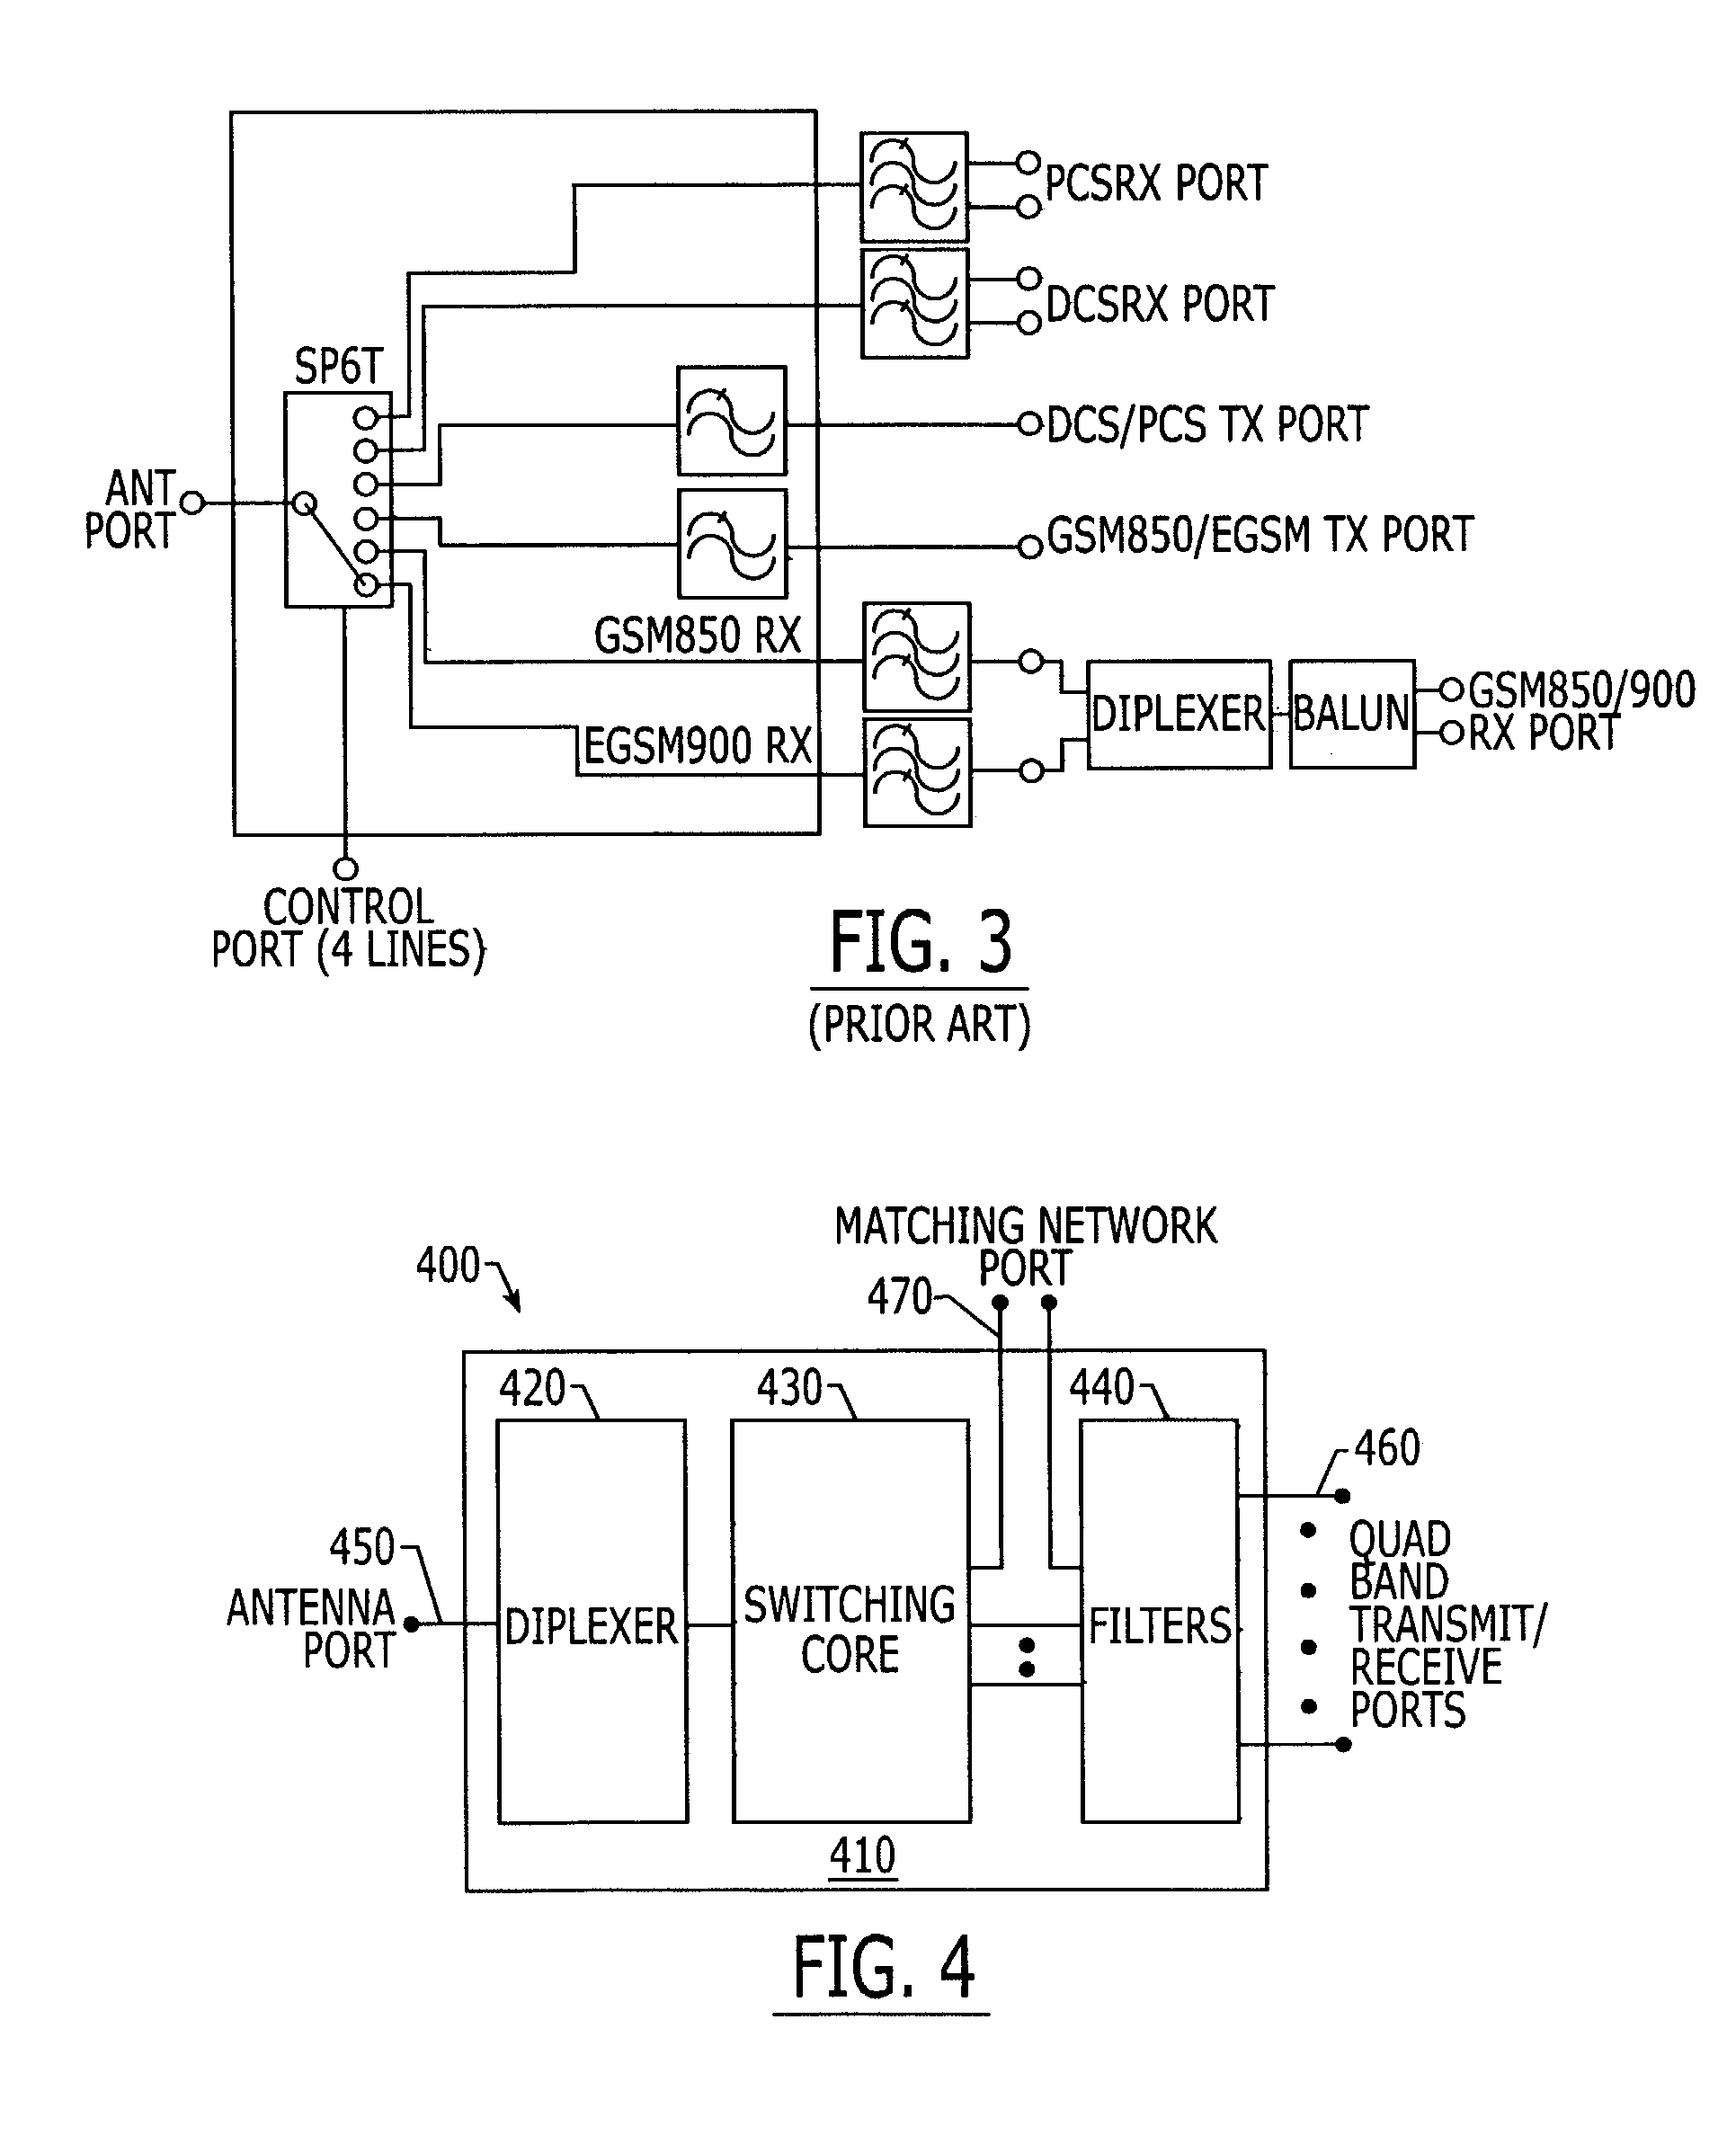 Quad band antenna interface modules including matching network ports